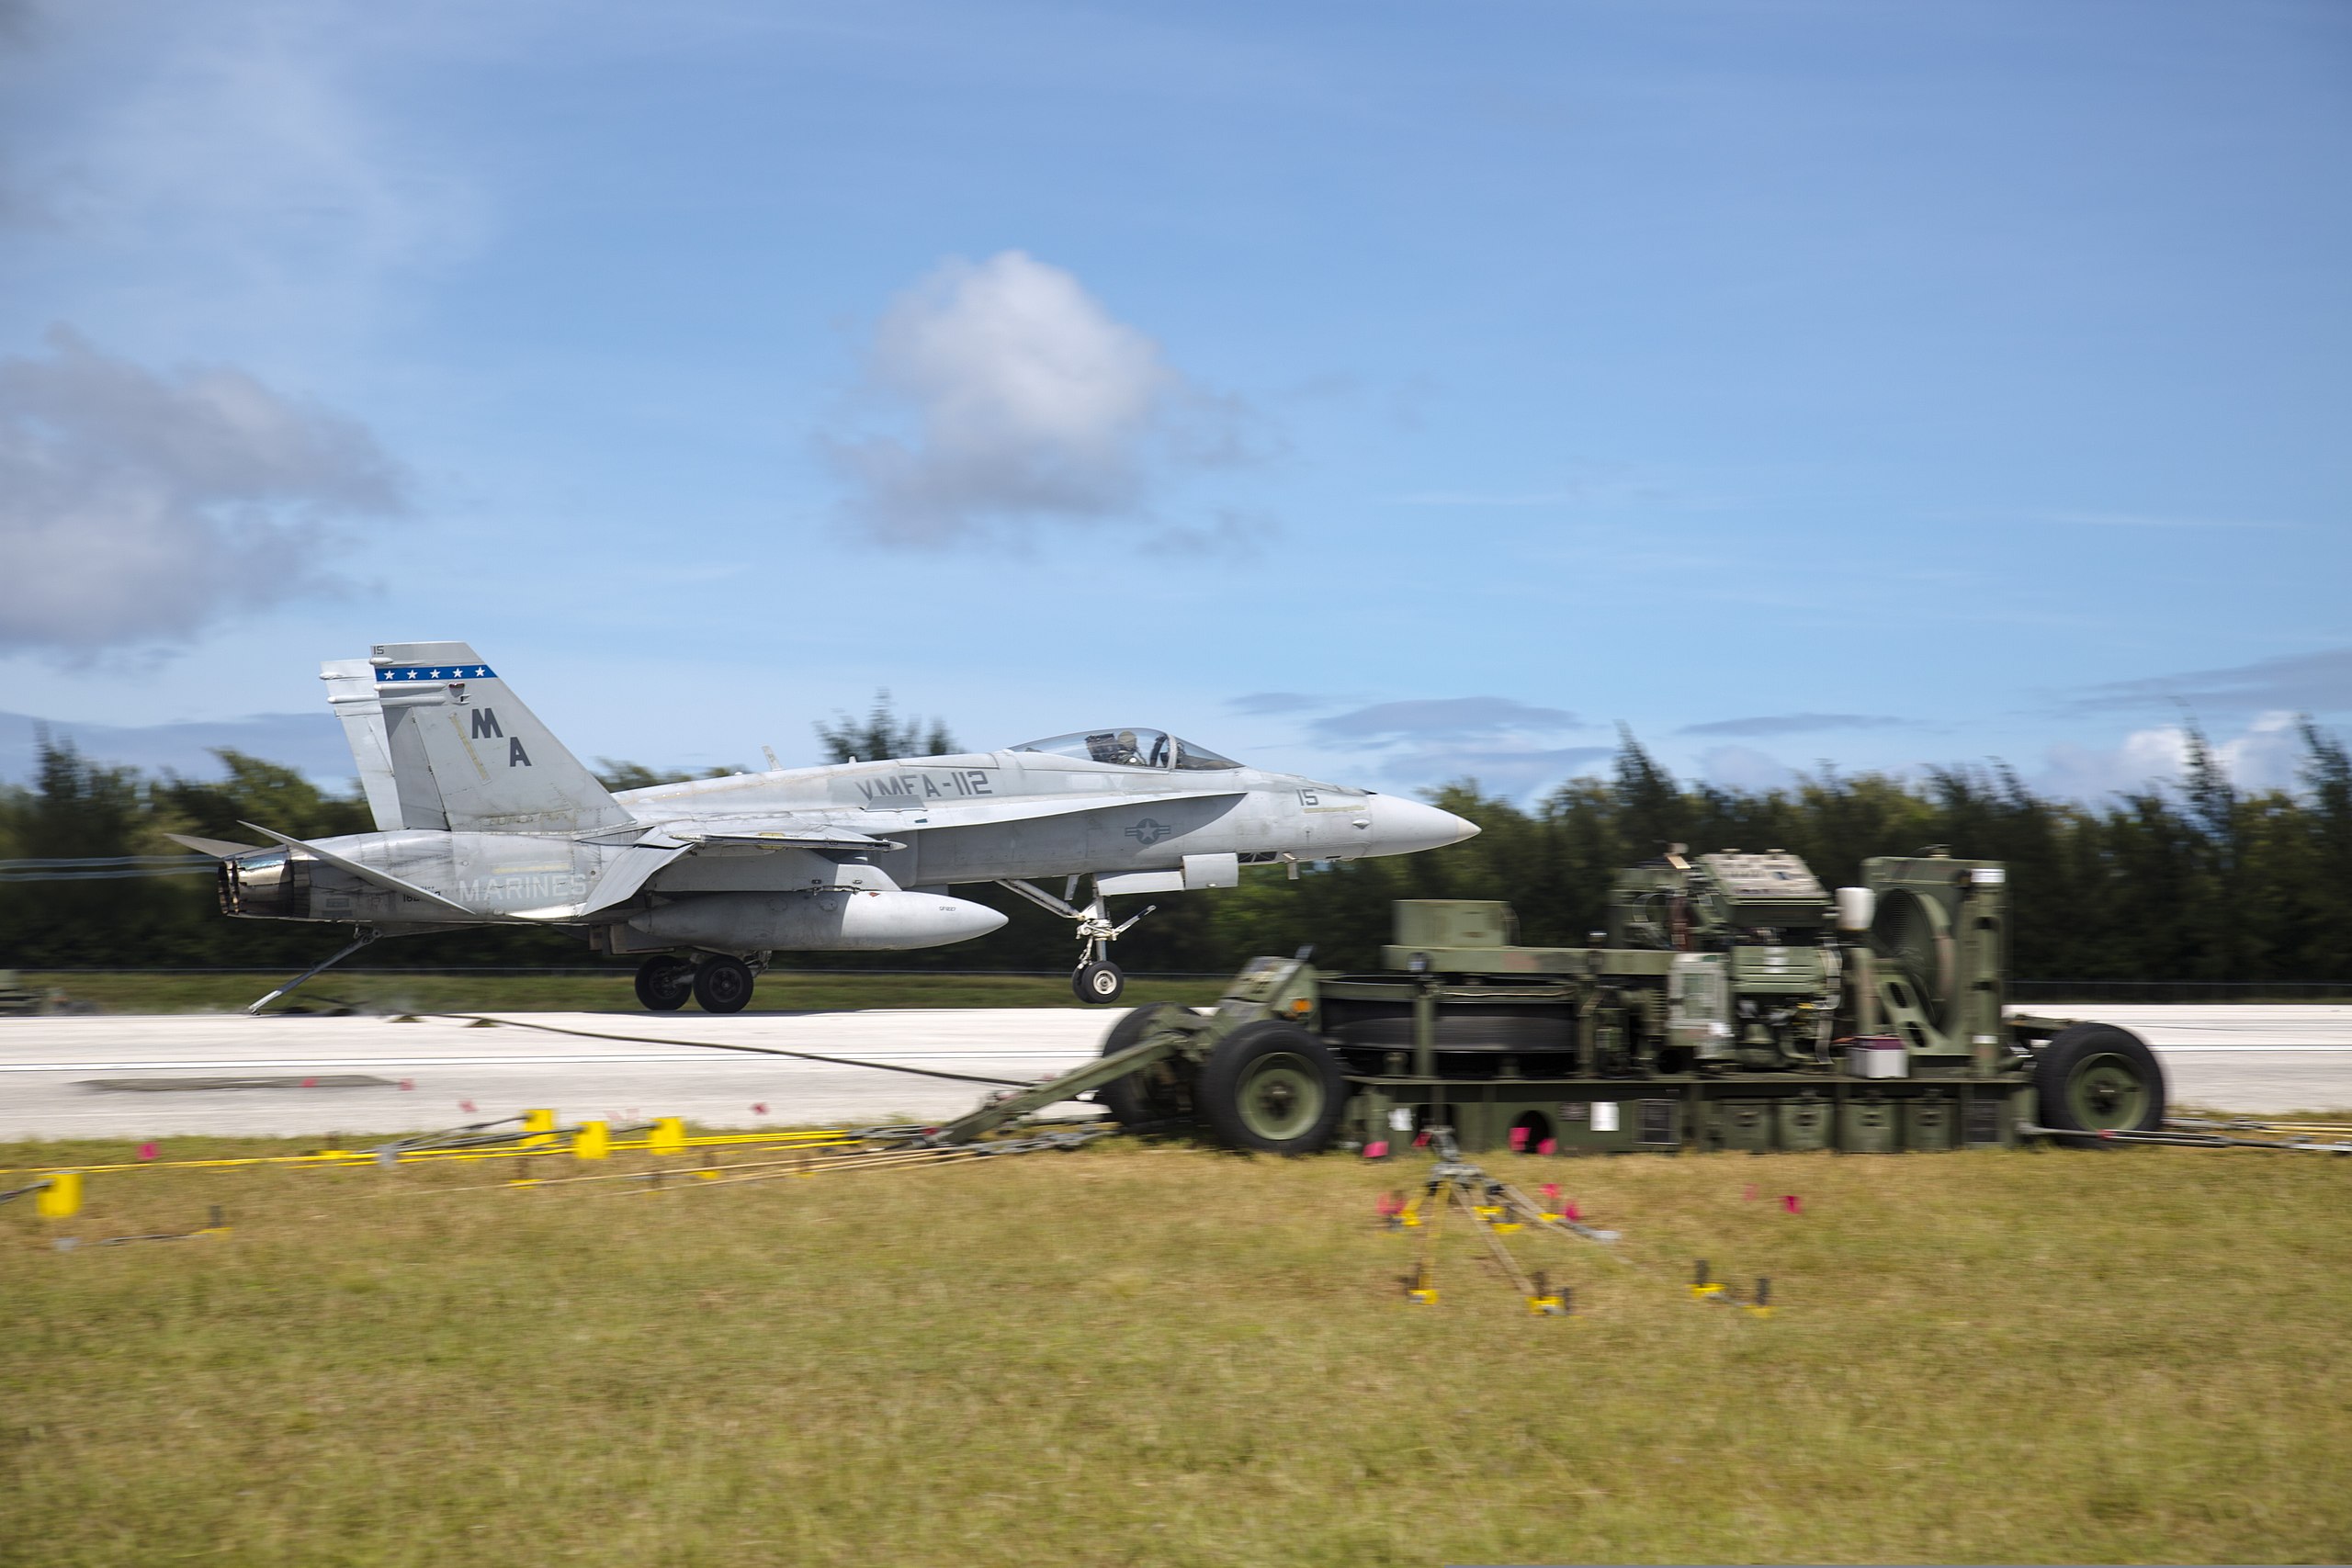 An F/A-18D Hornet lands on the runway to be stopped by M-31 Marine Corps expeditionary arresting gear systems Dec. 5 at Tinian's West Field during exercise Forager Fury II. The training consisted of rapid ground refueling and arrested landing operations, extending aviation training throughout the Mariana Island Range Complex. During this training, Marine aviation units are able to practice, train for, and execute the six functions of Marine aviation: assault support, anti-aircraft warfare, offensive air support, electronic warfare, control of aircraft and missiles, and aerial reconnaissance. The squadrons that participated in the training were Marine Fighter Attack Squadron 112, "The Cowboys," from Fort Worth, Texas, and VMFA 232, "The Red Devils," from Marine Corps Air Station Miramar, Calif., who are currently deployed to MCAS Iwakuni, Japan, under the unit deployment program with MAG-12. (U.S. Marine Photo by Lance Cpl. Antonio Rubio/Released)